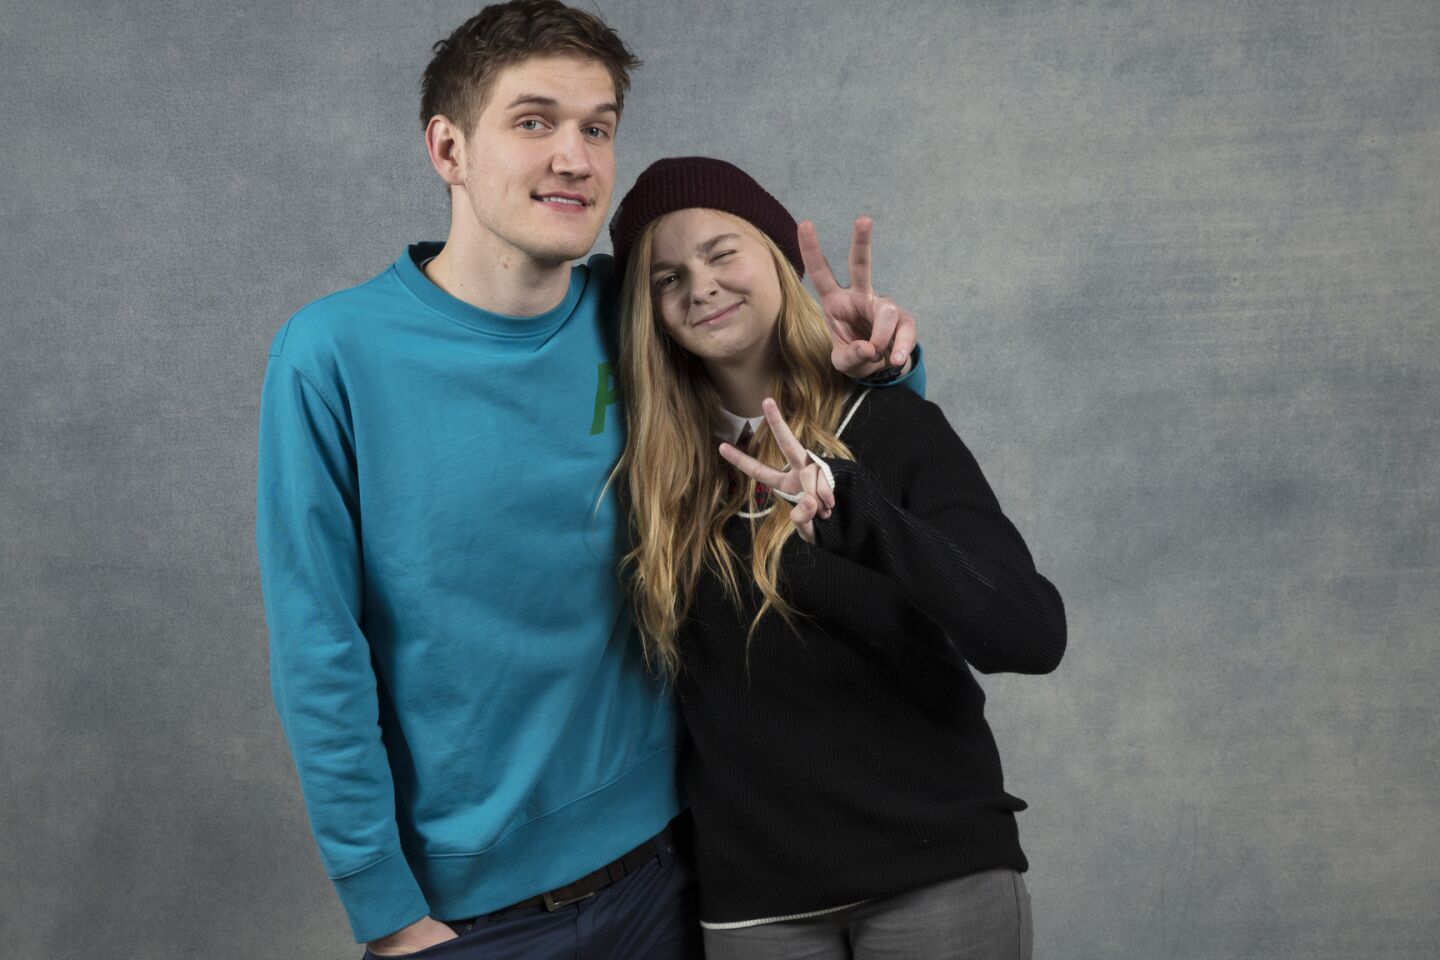 Writer/Director Bo Burnham and actress Elsie Fisher from the film, "Eighth Grade," photographed in the L.A. Times Studio during the Sundance Film Festival in Park City, Utah, Jan. 20, 2018.